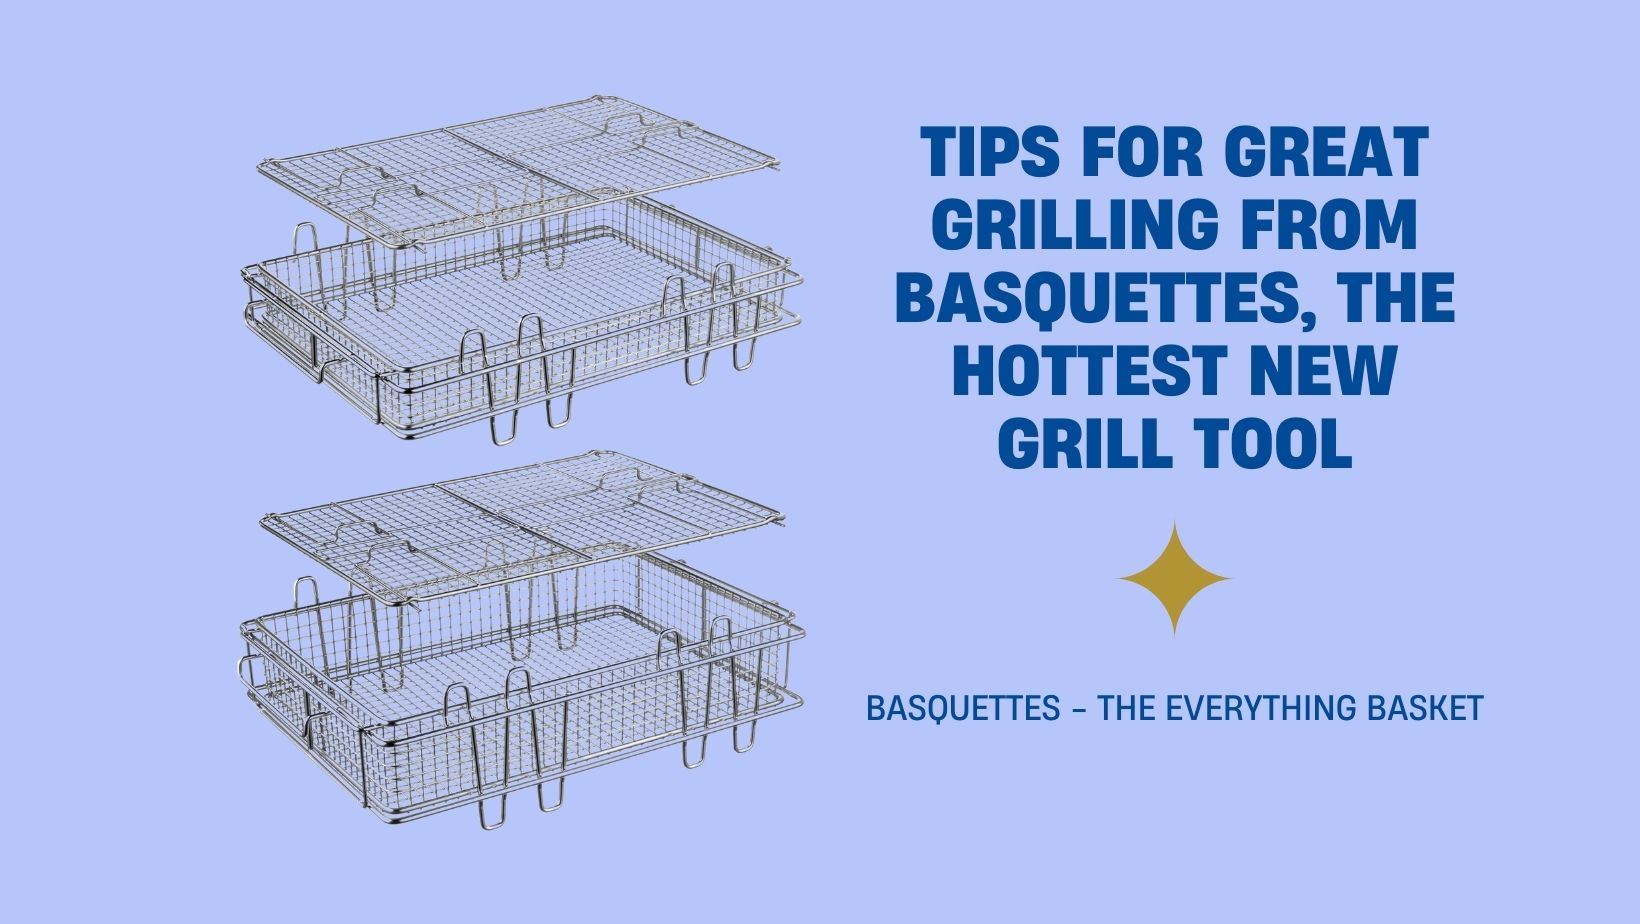 Grilling Tips by Basquettes